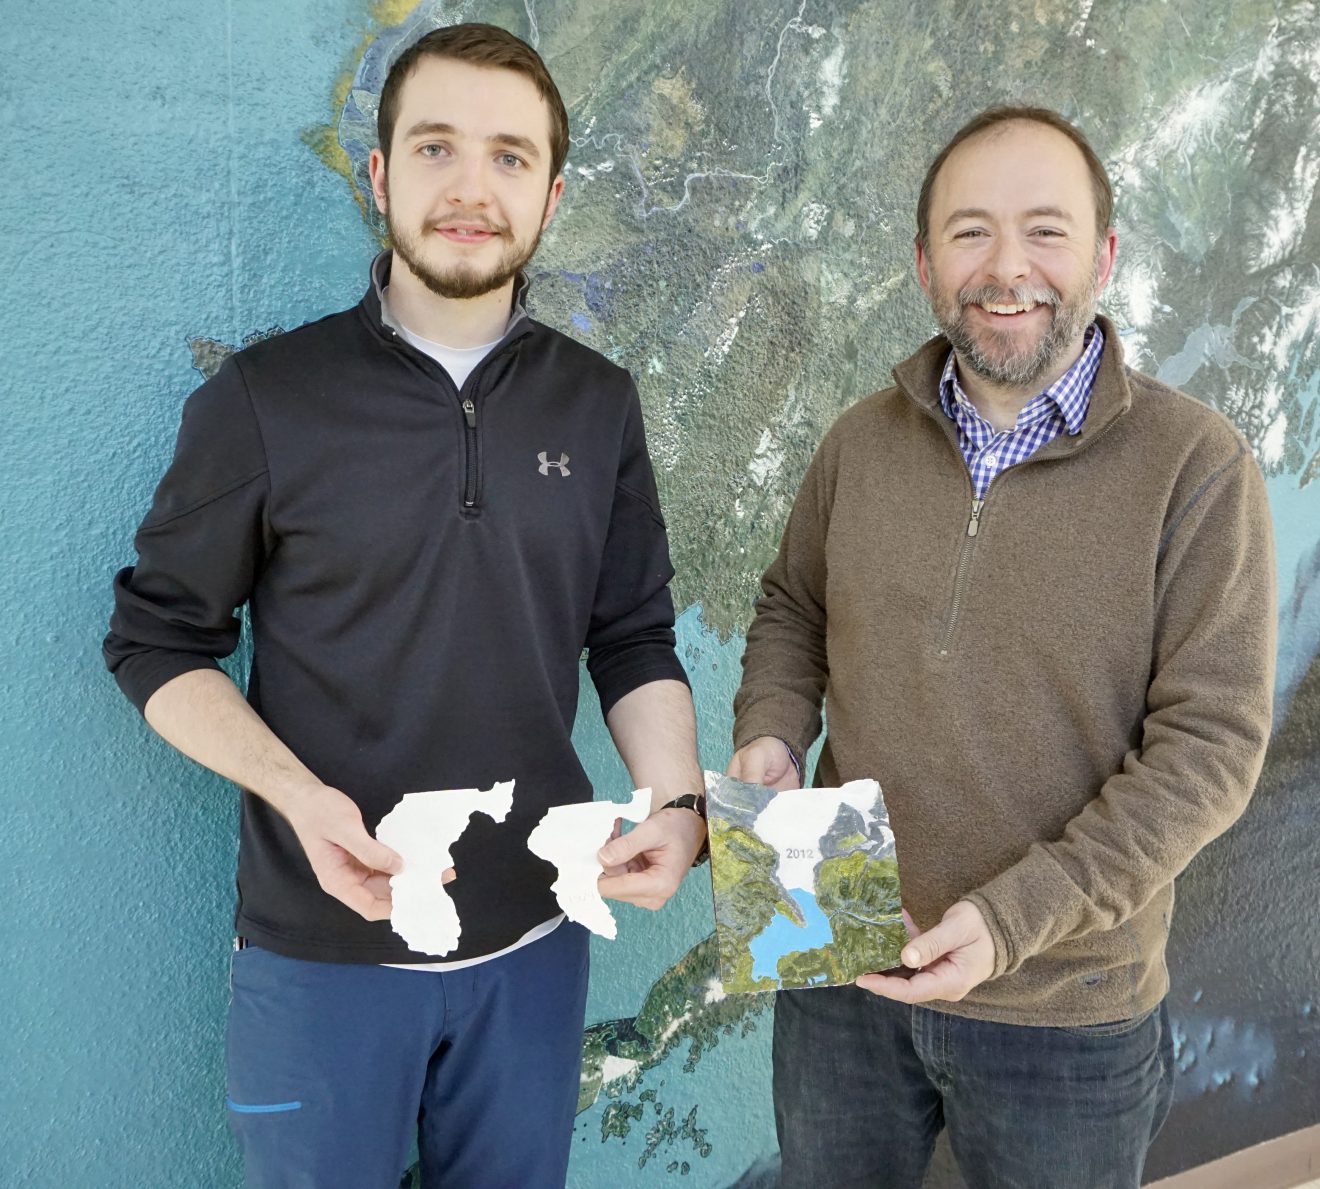 Reyce Bogardus and Matthew Balazs pose with their 3D printed scale model of the Mendenhall Glacier. They hope the model can help people visualize how much the glacier has retreated since 1948. UAF photo by Fritz Freudenberger